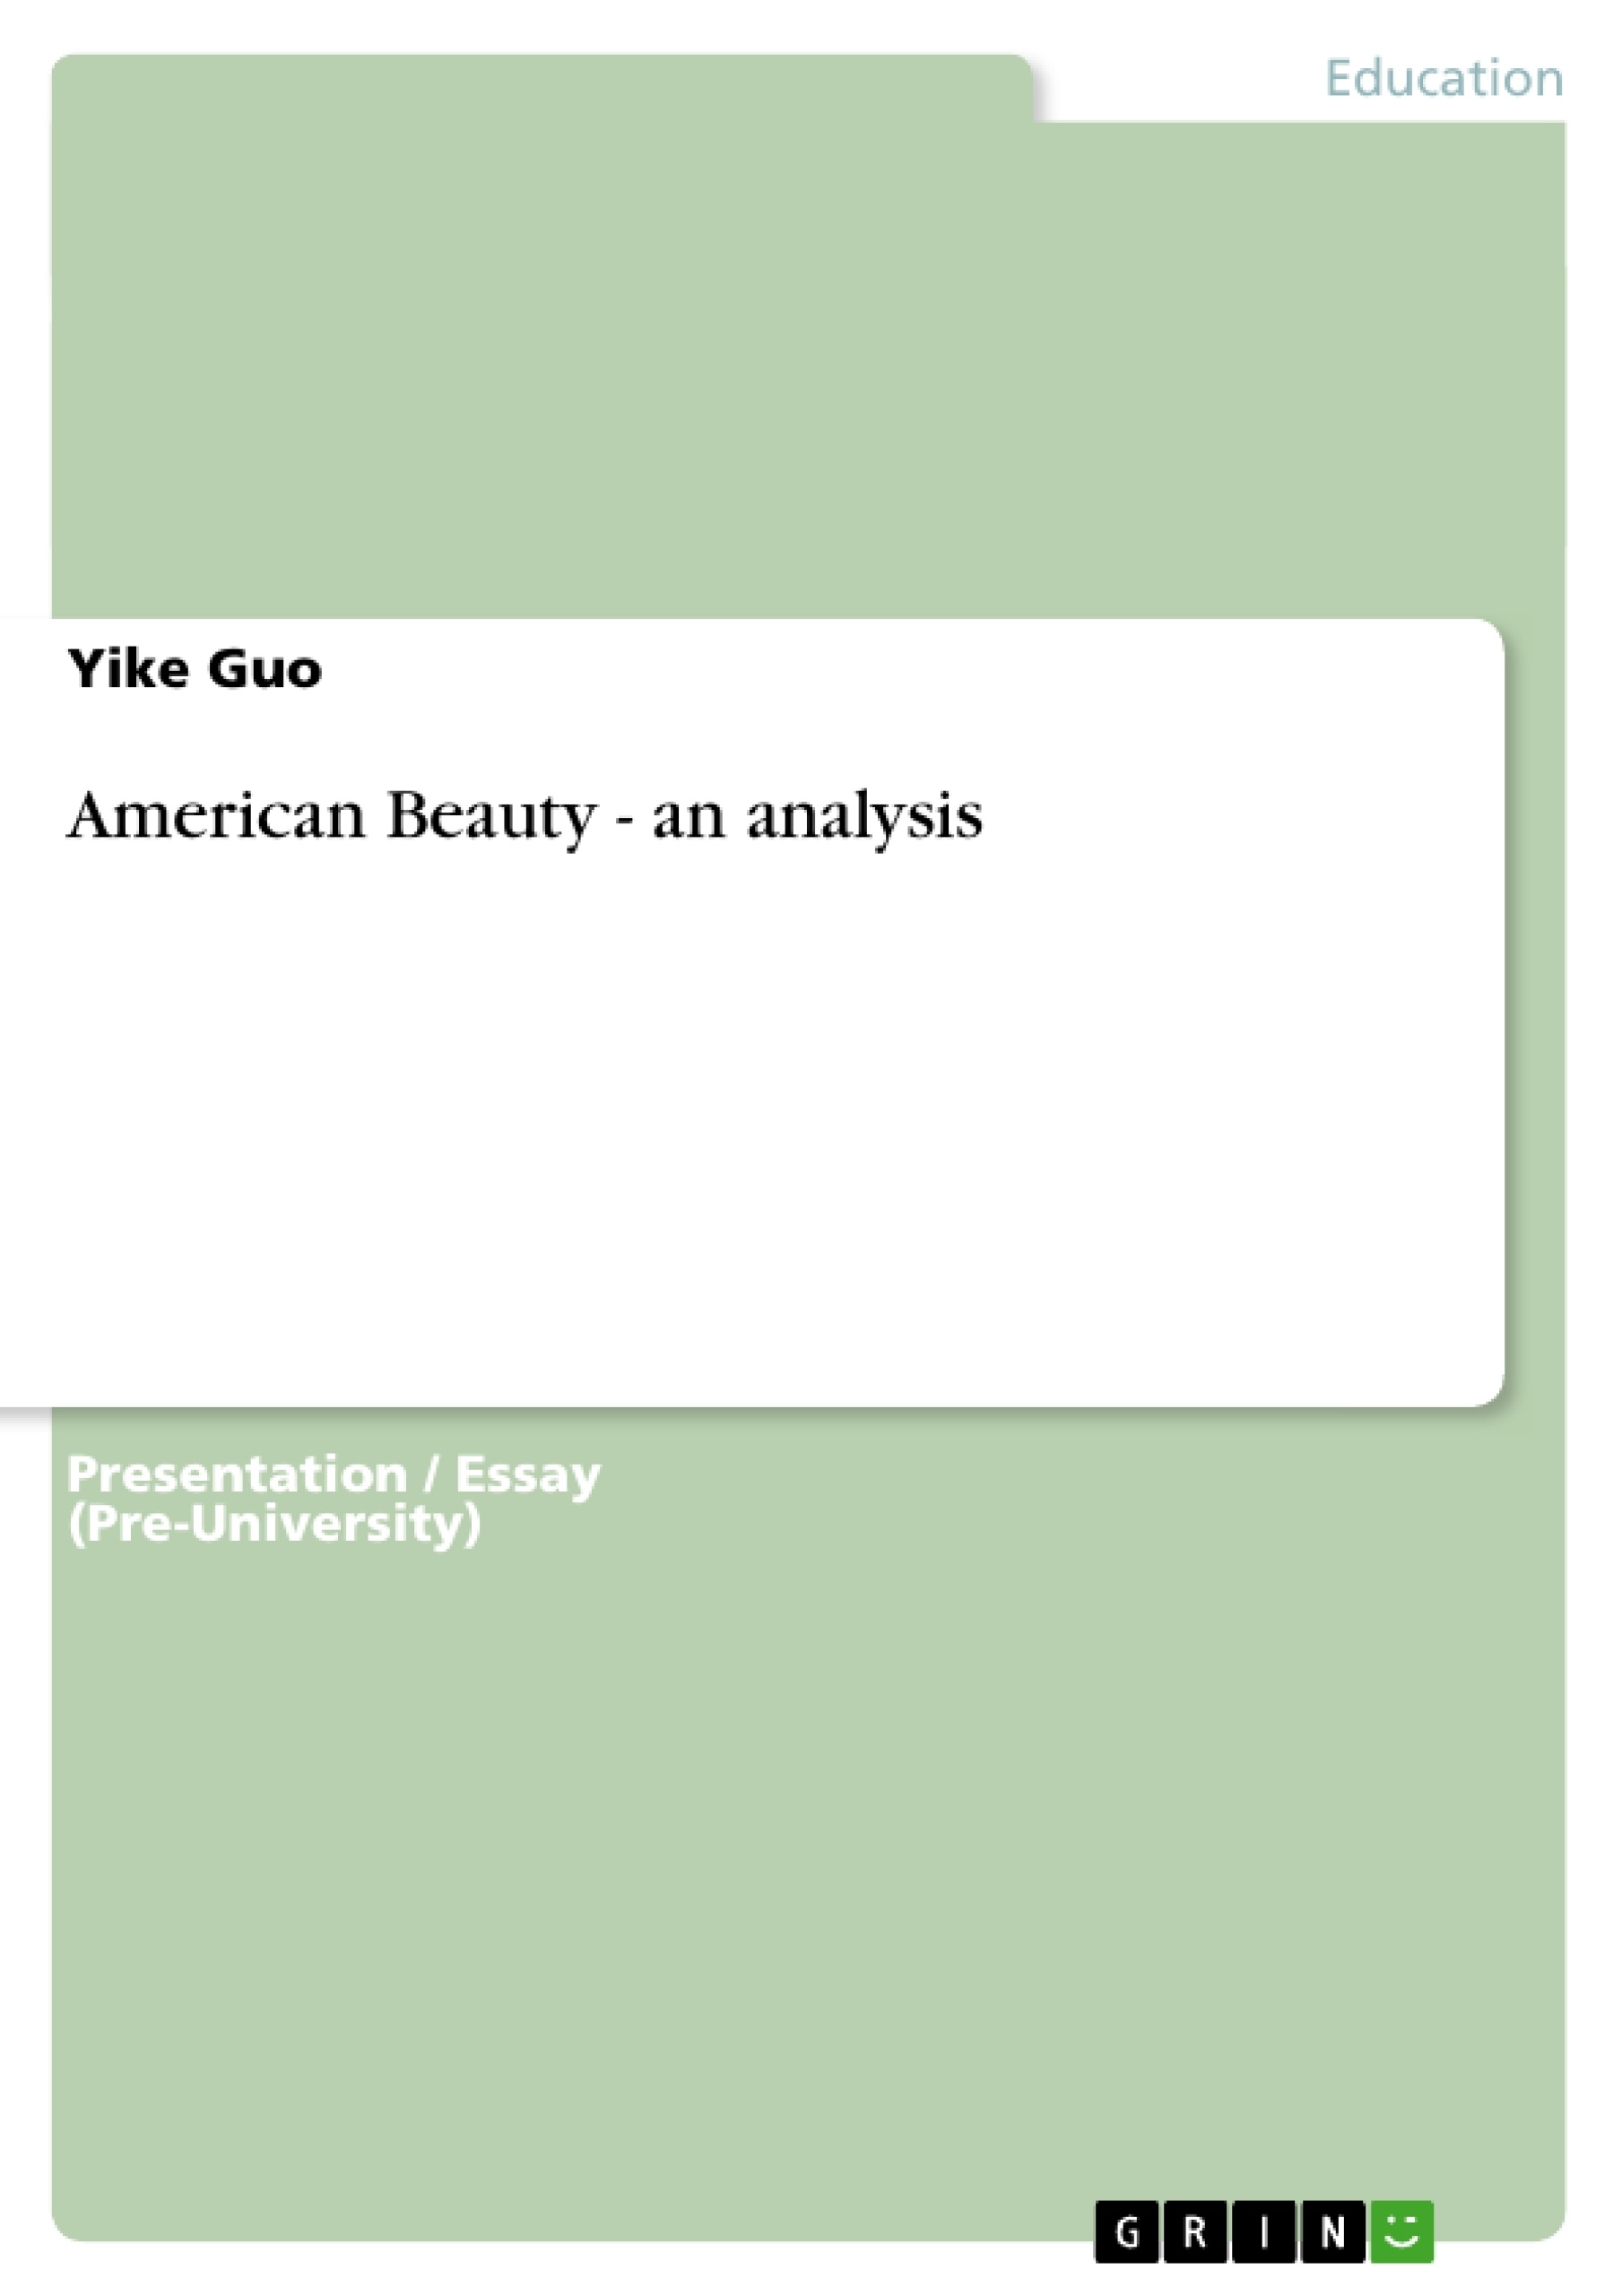 Buy research papers online cheap the graduate/american beauty sequence analysis